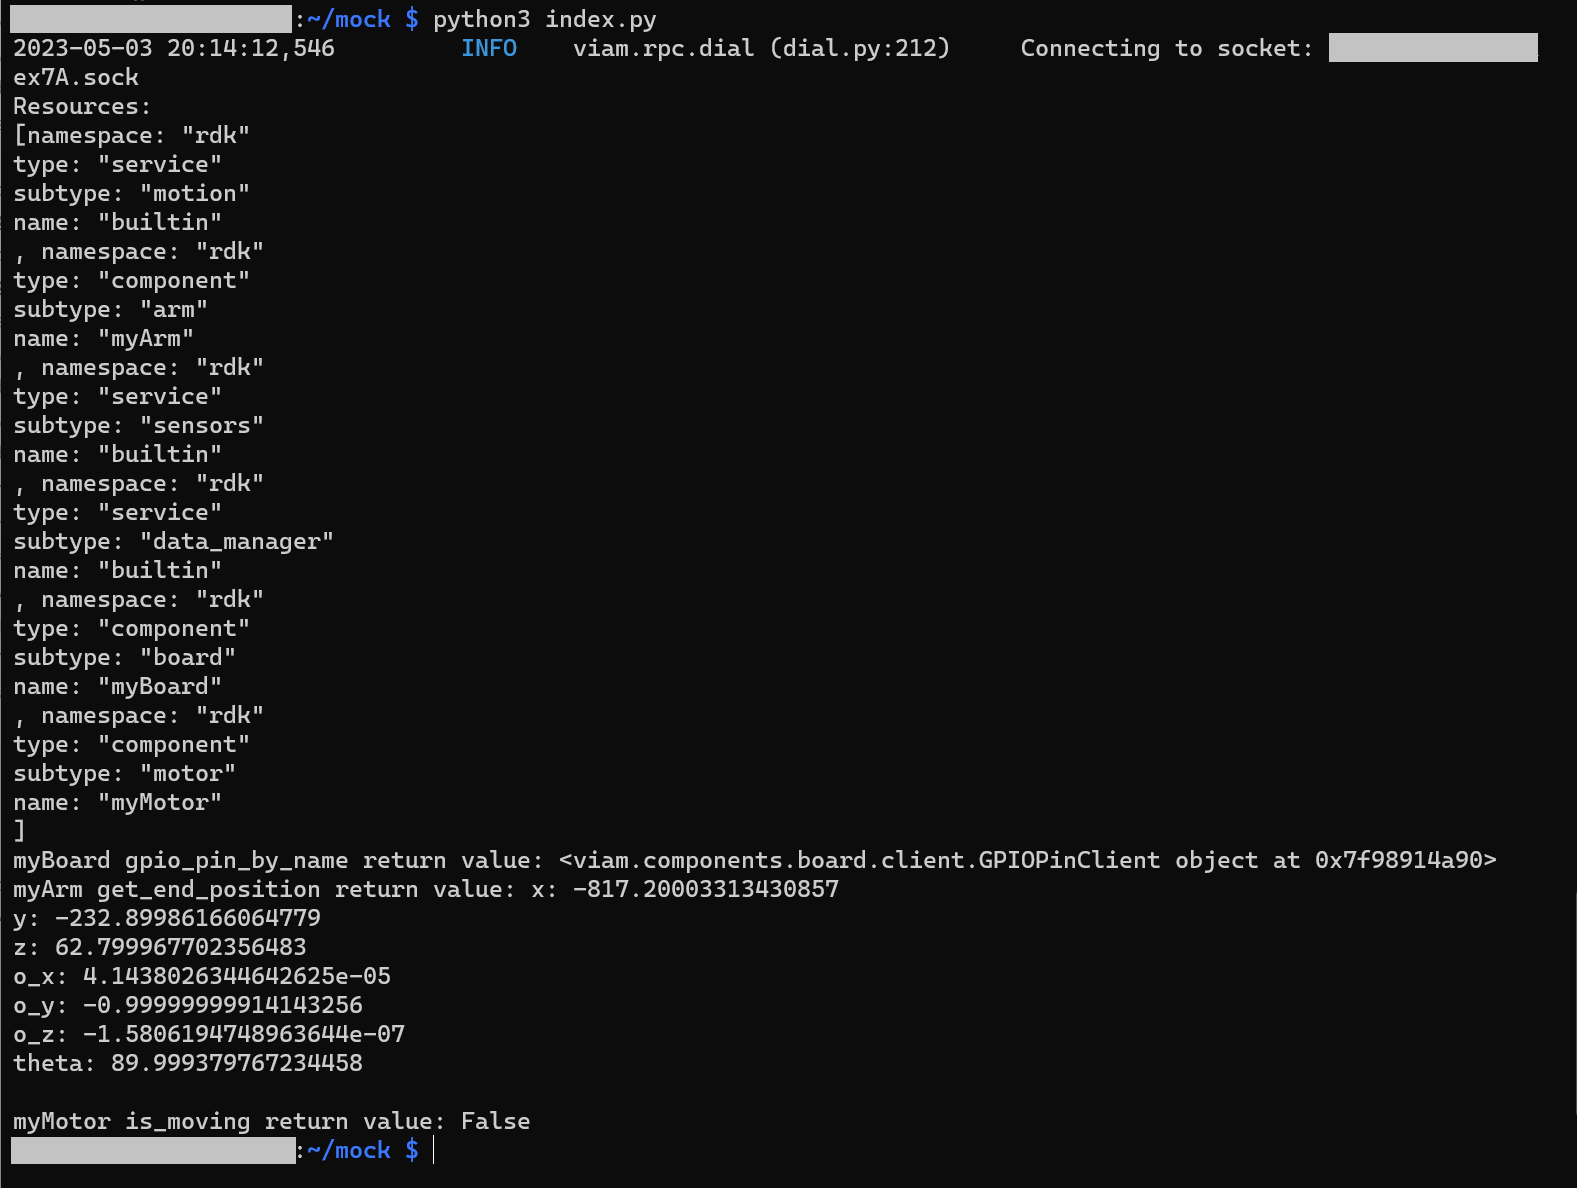 Command line output from running python3 index.py when your Raspberry Pi has correctly connected and initialized with the Viam app. The output is an array of resources that have been pulled from the Viam app. The list includes the motion service, arm component, data manager, board component and motor component. There is also a list of arm position and orientation values.